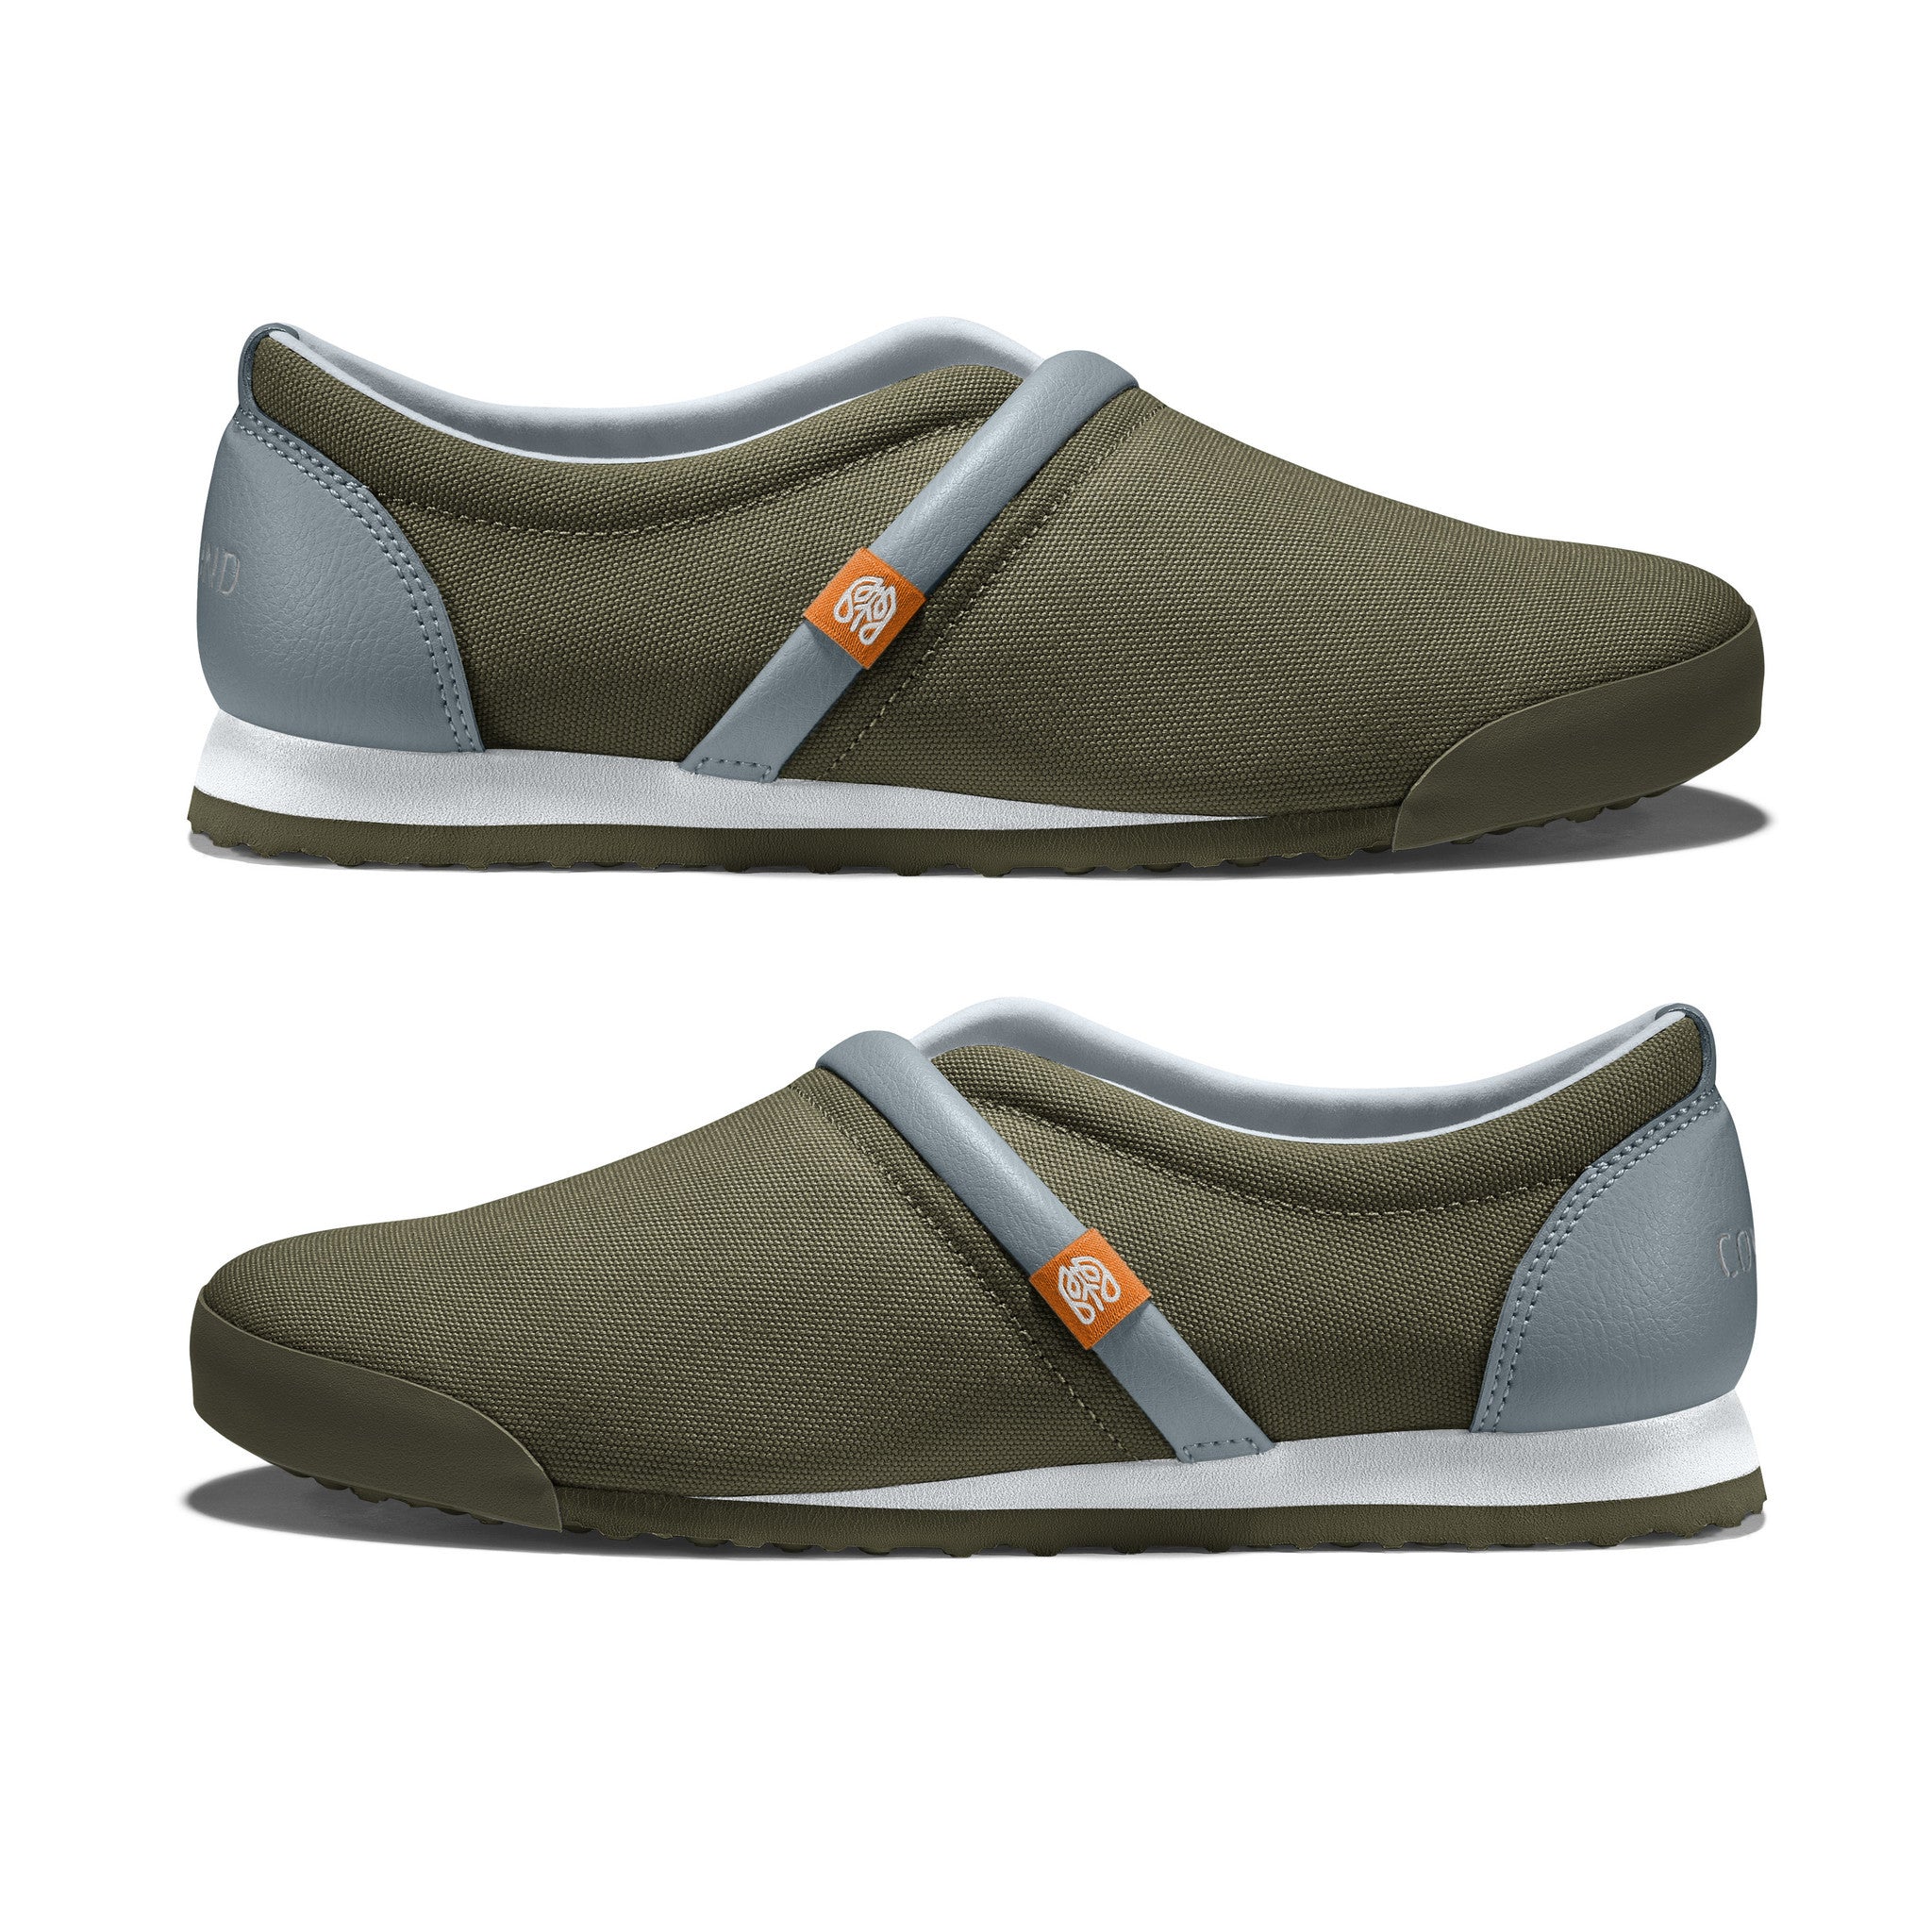 Military_Olive - Common Ground Footwear Shoes Side View